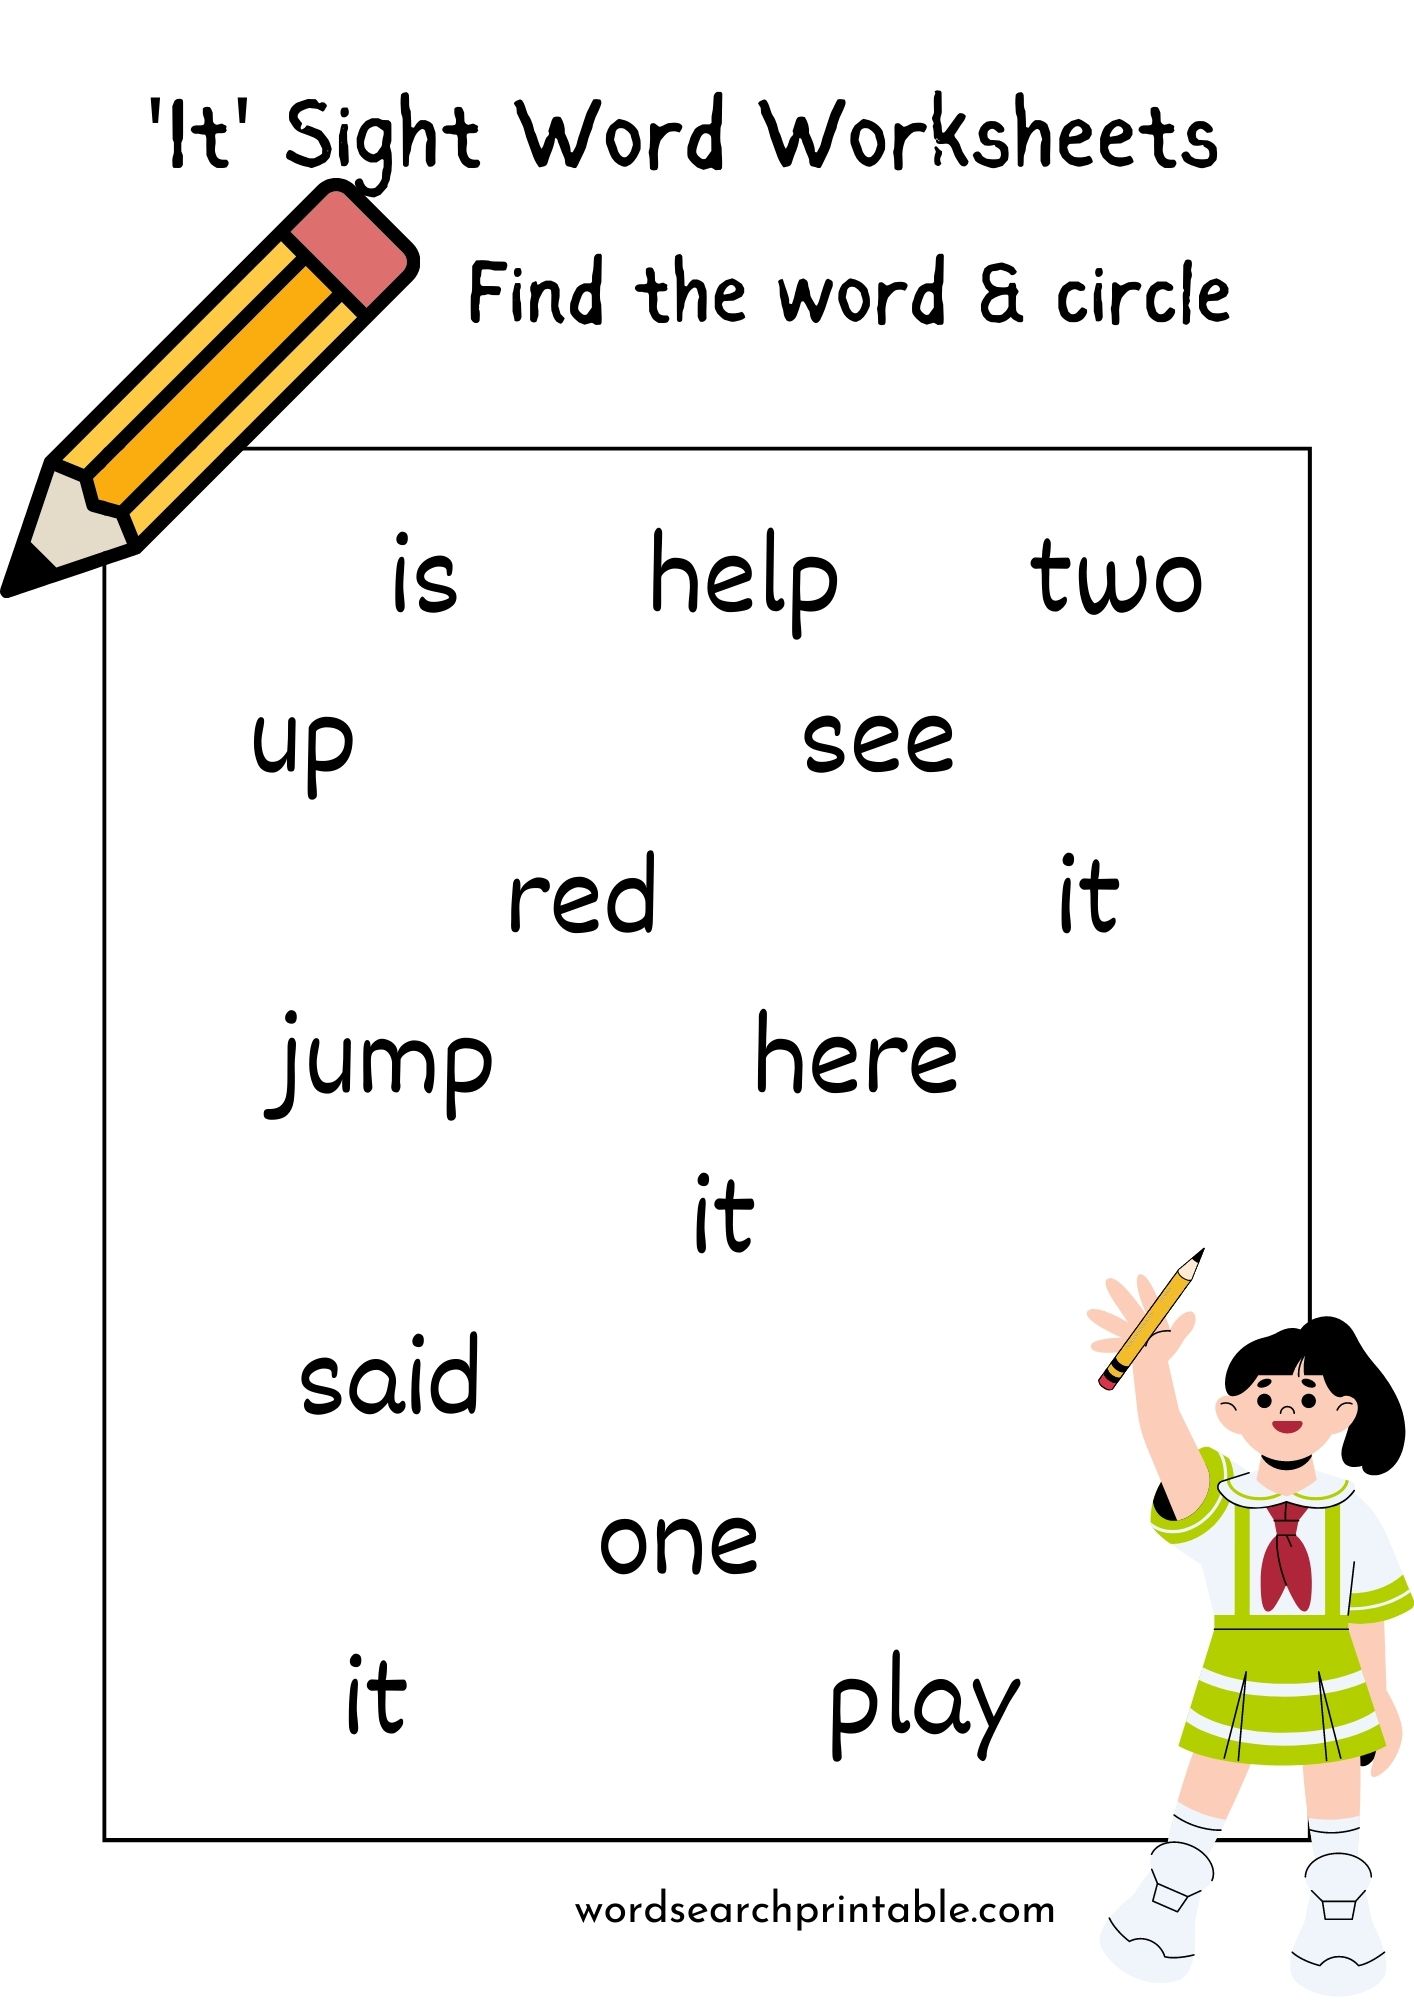 Find the sight word 'It' and circle it